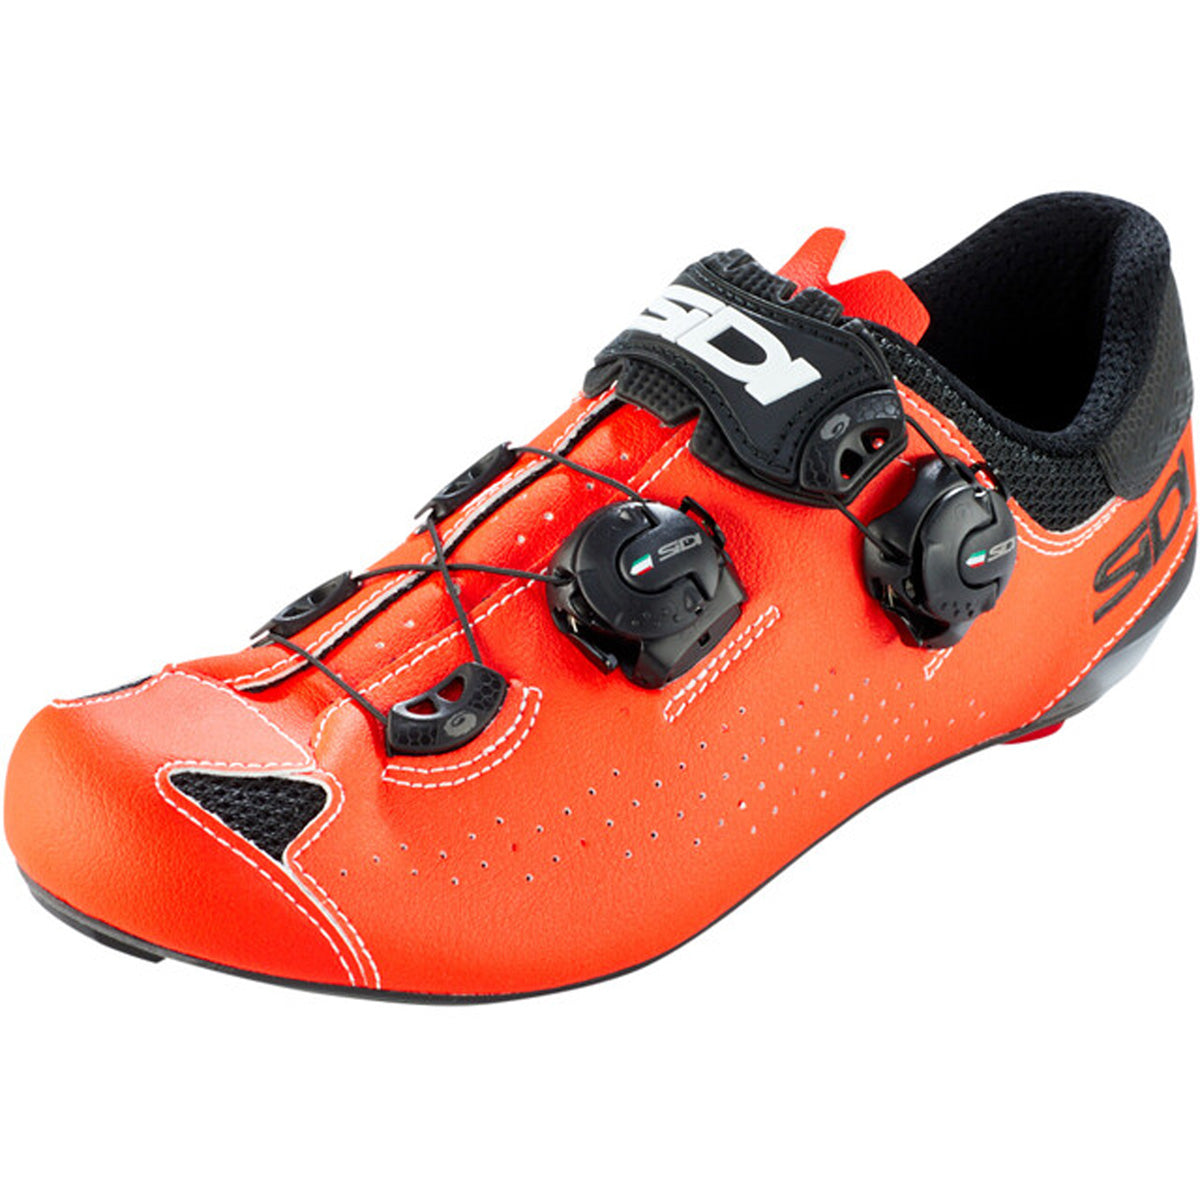 Sidi Genius 10 Road Bicycle Shoes (CLOSEOUT) - Black/Flo Red